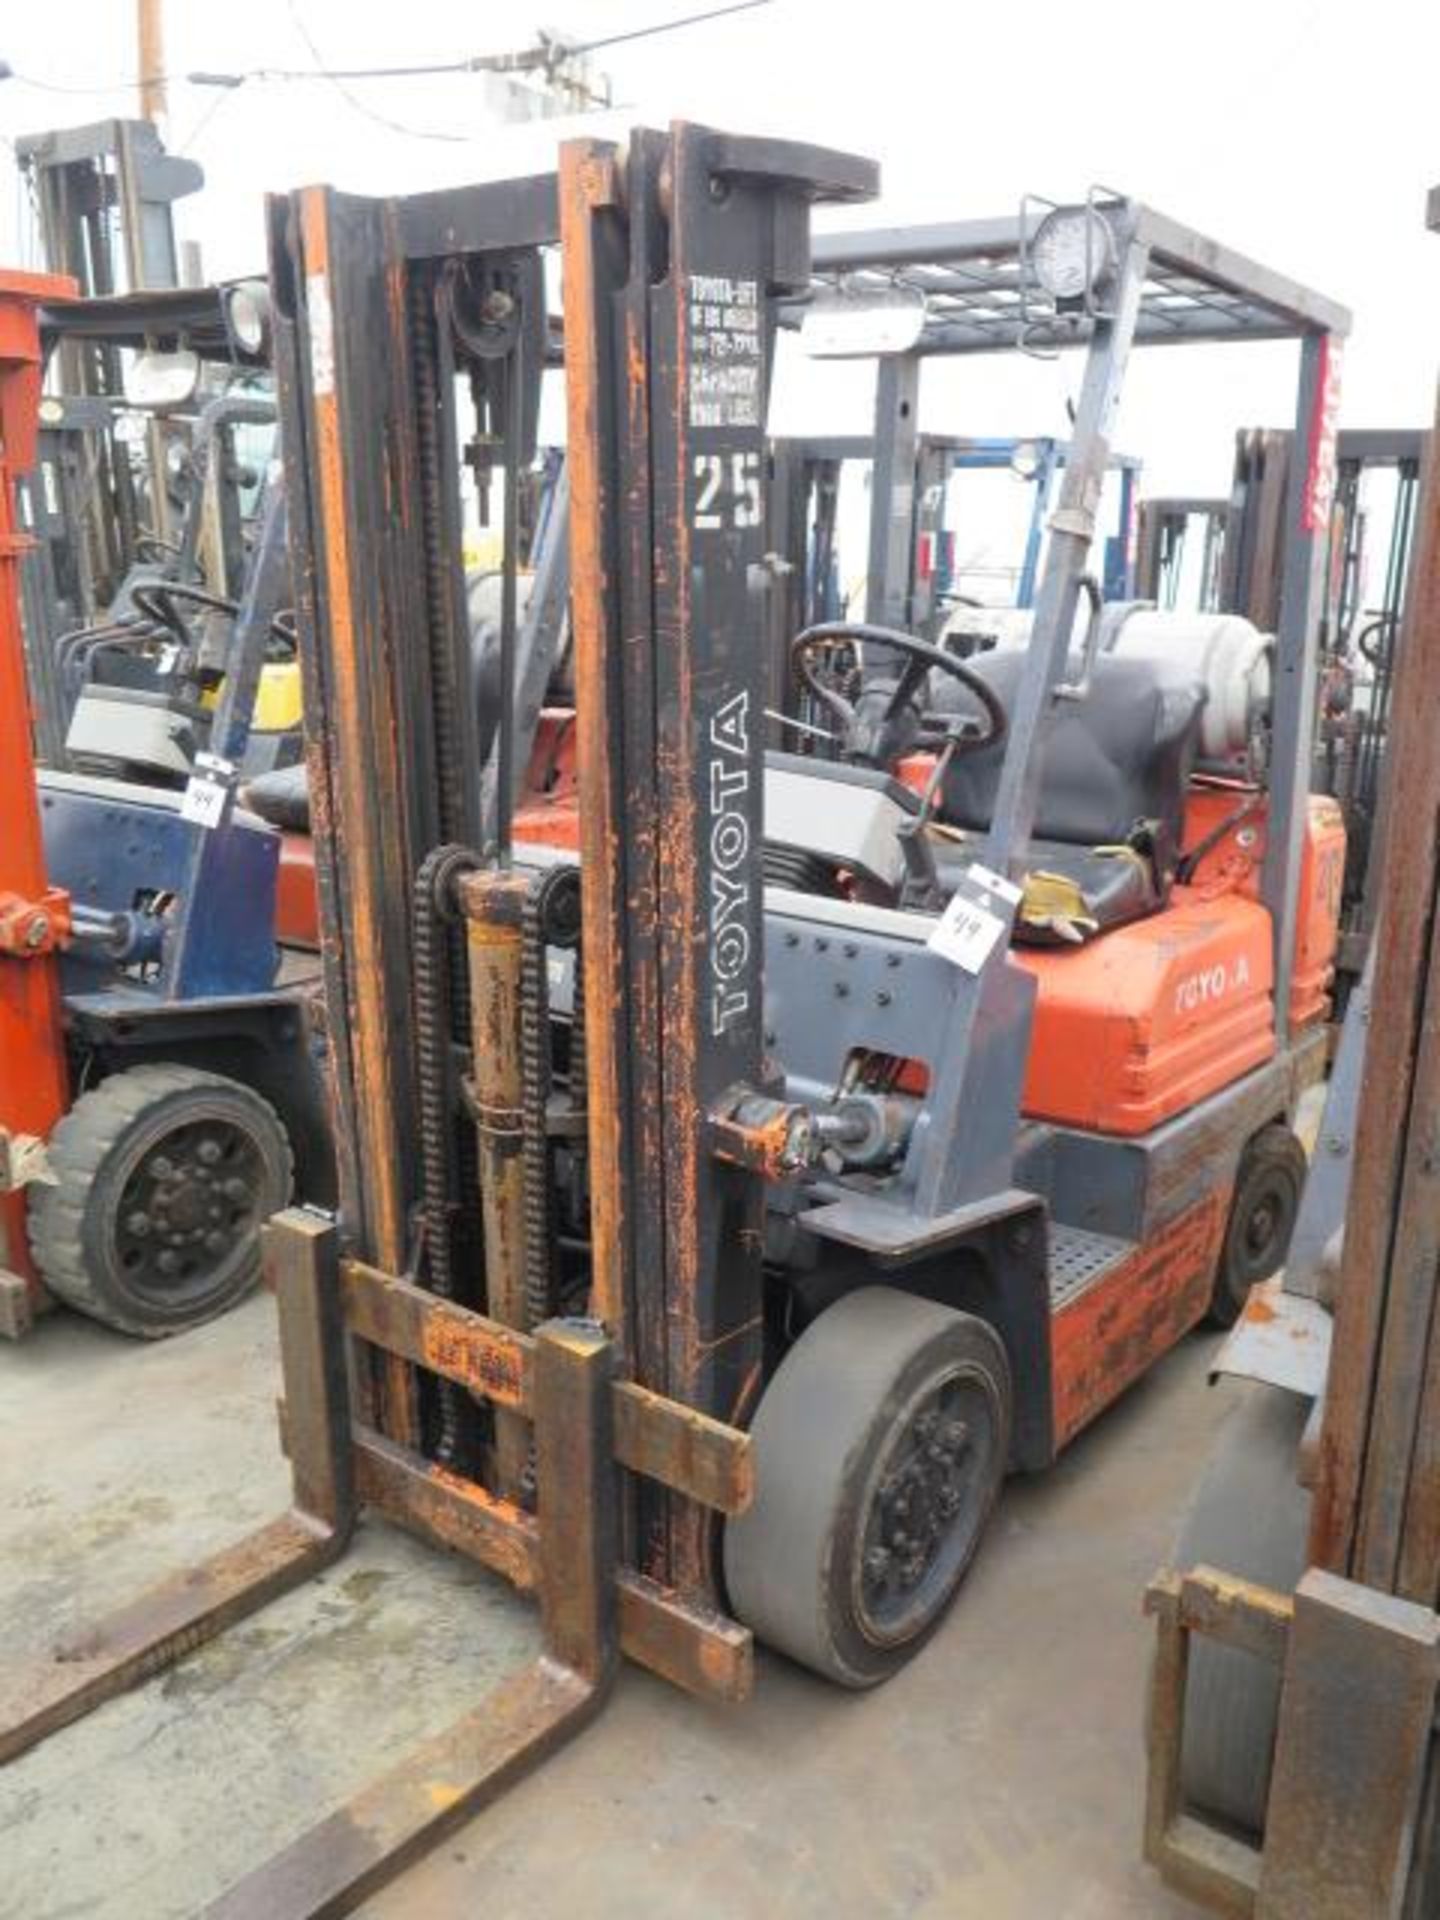 Toyota 5FGC25 5000 Lb Cap LPG Forklift s/n 85158 w/ 3-Stage Mast, 169" Lift Height, Cushion Tires,